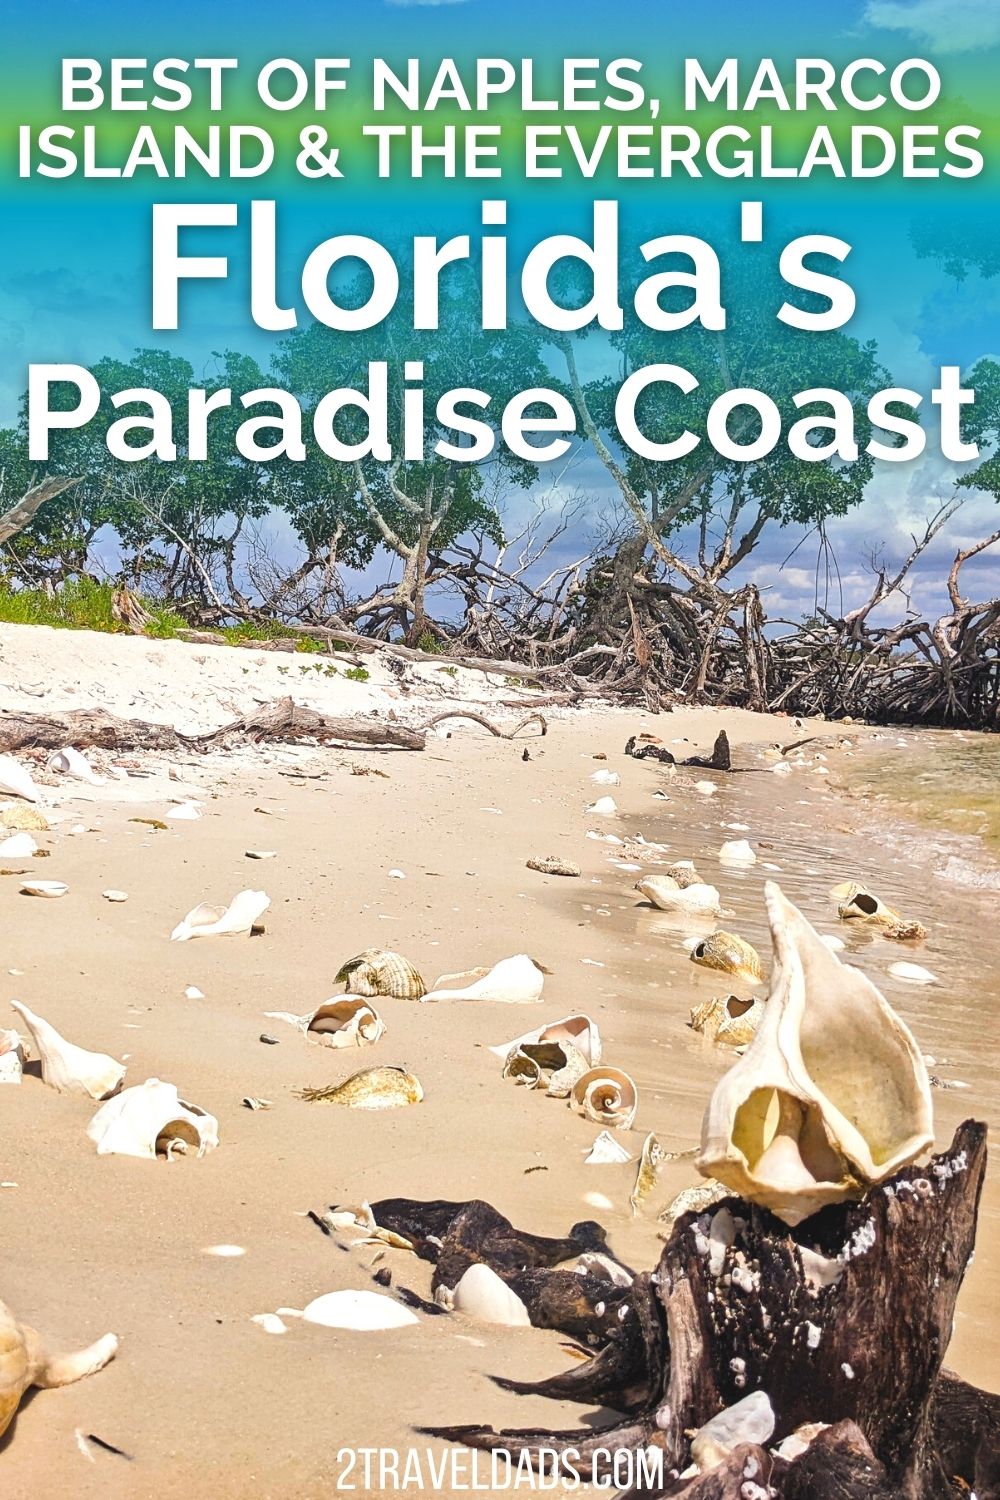 The Paradise Coast of Florida is the perfect vacation destination. Encompassing Naples, Marco Island and the Everglades, this area is home to epic wildlife adventures and gorgeous beaches and gardens with things to do for everyone.